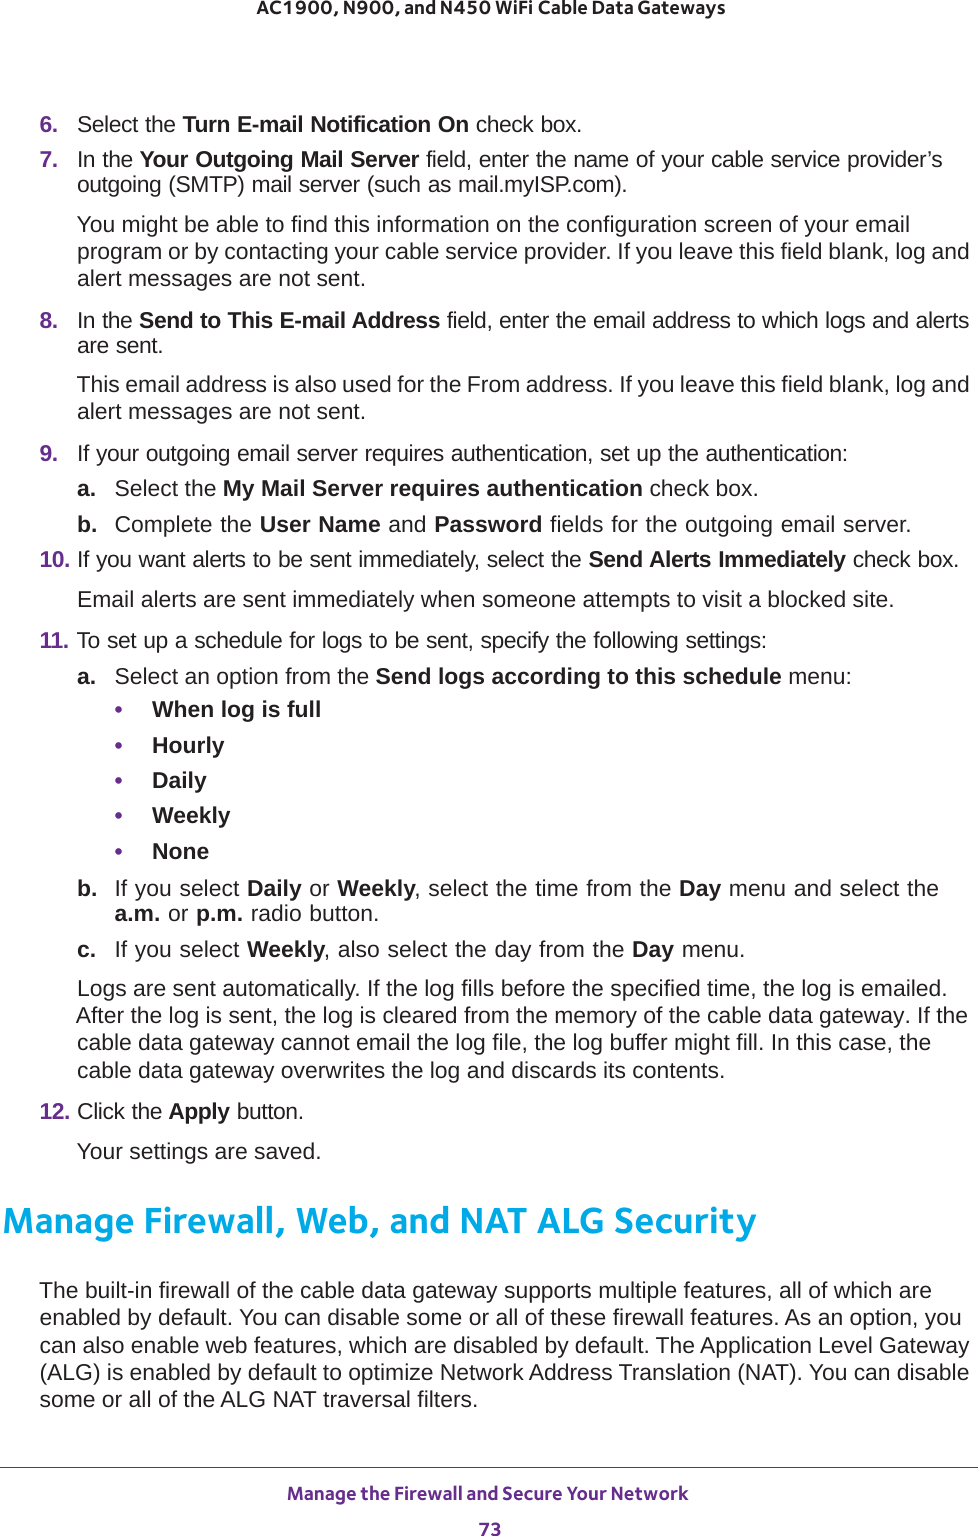 Manage the Firewall and Secure Your Network 73 AC1900, N900, and N450 WiFi Cable Data Gateways6.  Select the Turn E-mail Notification On check box.7.  In the Your Outgoing Mail Server field, enter the name of your cable service provider’s outgoing (SMTP) mail server (such as mail.myISP.com). You might be able to find this information on the configuration screen of your email program or by contacting your cable service provider. If you leave this field blank, log and alert messages are not sent.8.  In the Send to This E-mail Address field, enter the email address to which logs and alerts are sent.This email address is also used for the From address. If you leave this field blank, log and alert messages are not sent.9.  If your outgoing email server requires authentication, set up the authentication:a. Select the My Mail Server requires authentication check box. b.  Complete the User Name and Password fields for the outgoing email server.10. If you want alerts to be sent immediately, select the Send Alerts Immediately check box.Email alerts are sent immediately when someone attempts to visit a blocked site.11. To set up a schedule for logs to be sent, specify the following settings:a. Select an option from the Send logs according to this schedule menu:•When log is full•Hourly•Daily•Weekly•Noneb.  If you select Daily or Weekly, select the time from the Day menu and select the a.m. or p.m. radio button.c.  If you select Weekly, also select the day from the Day menu.Logs are sent automatically. If the log fills before the specified time, the log is emailed. After the log is sent, the log is cleared from the memory of the cable data gateway. If the cable data gateway cannot email the log file, the log buffer might fill. In this case, the cable data gateway overwrites the log and discards its contents.12. Click the Apply button.Your settings are saved.Manage Firewall, Web, and NAT ALG SecurityThe built-in firewall of the cable data gateway supports multiple features, all of which are enabled by default. You can disable some or all of these firewall features. As an option, you can also enable web features, which are disabled by default. The Application Level Gateway (ALG) is enabled by default to optimize Network Address Translation (NAT). You can disable some or all of the ALG NAT traversal filters.